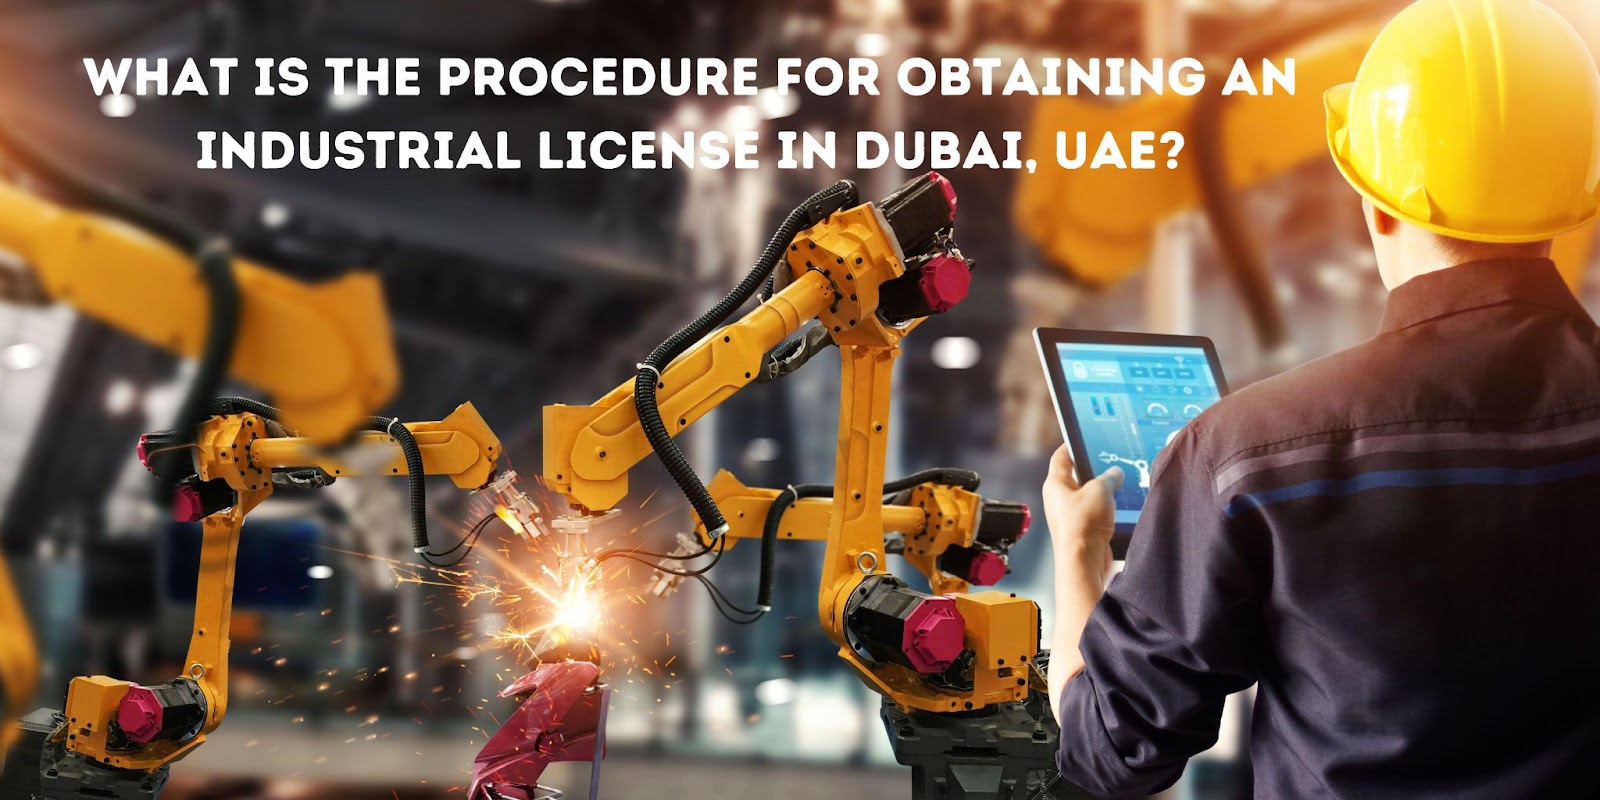 What is the procedure for obtaining an industrial license in Dubai, UAE?
